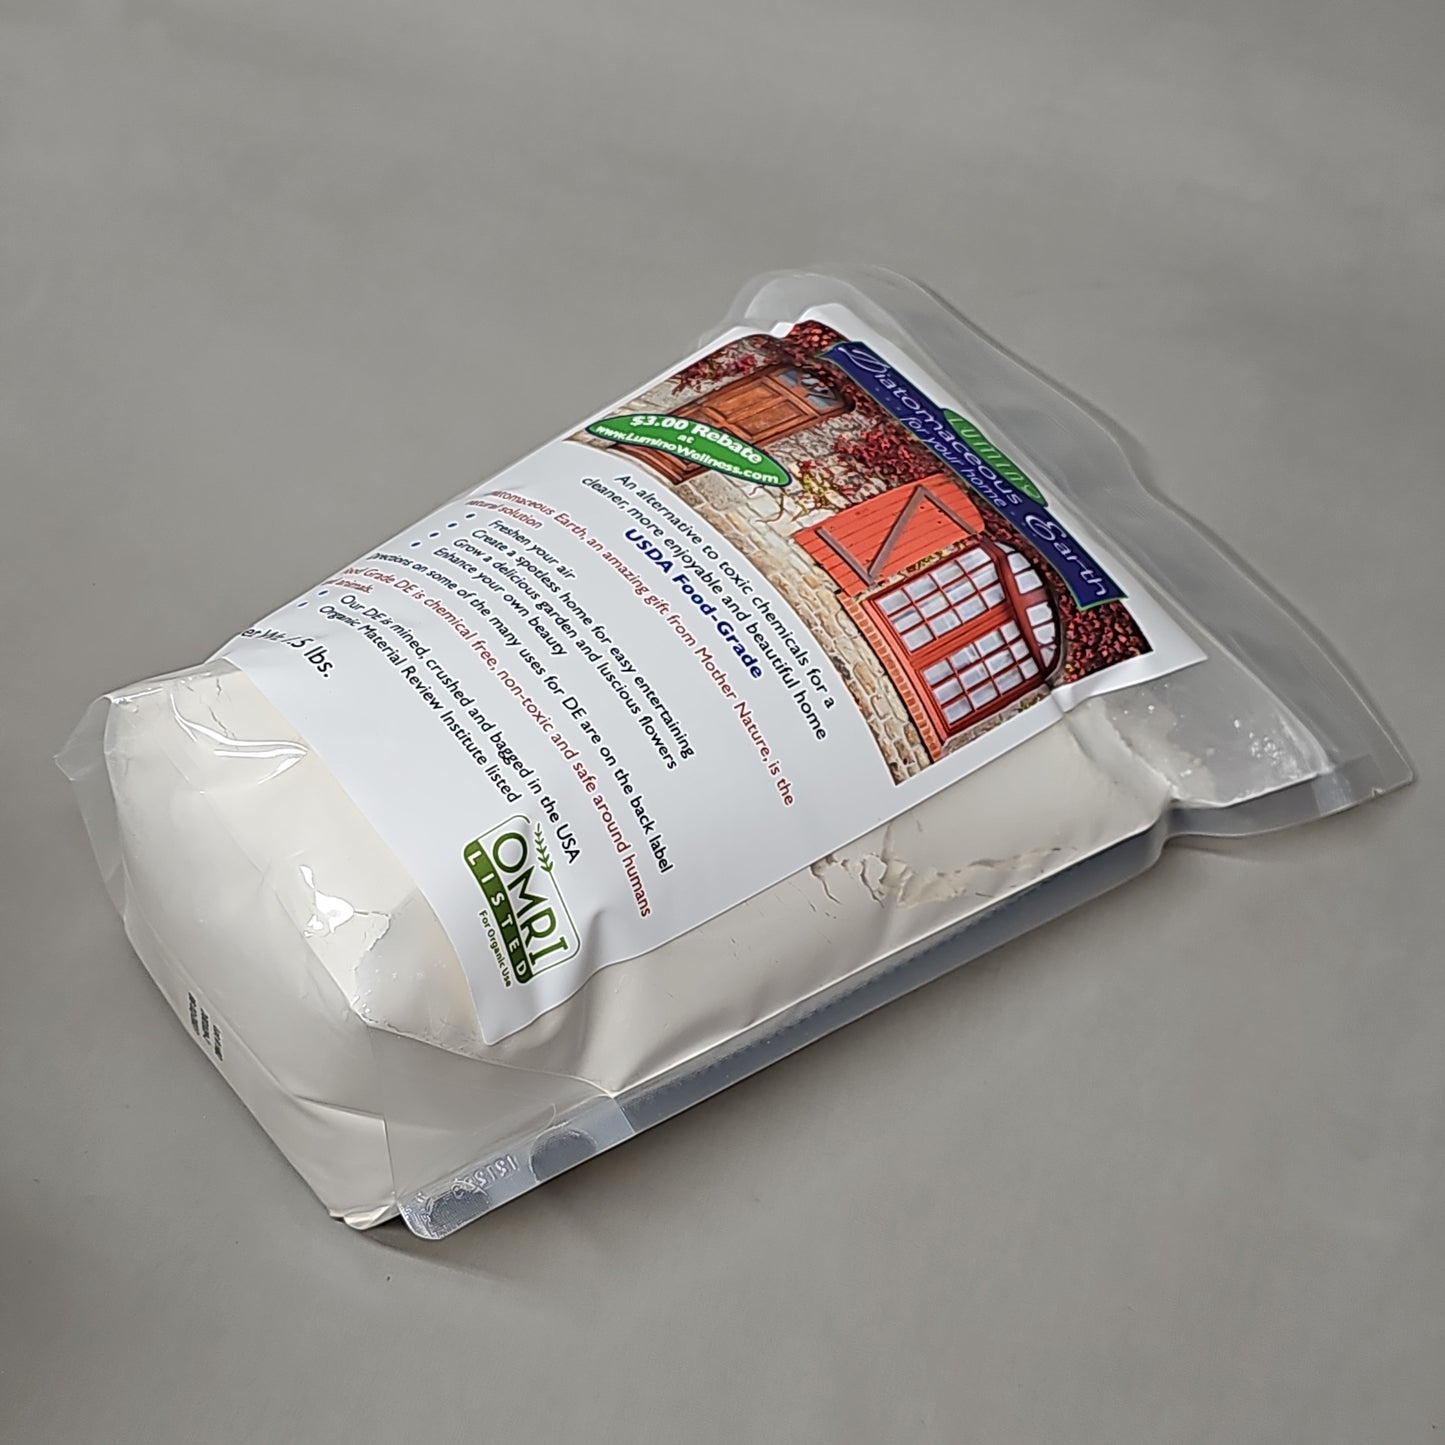 LUMINO Diatomaceous Earth For Your Home Food Grade 1.5 Lbs BB 02/27 MA595 (New)